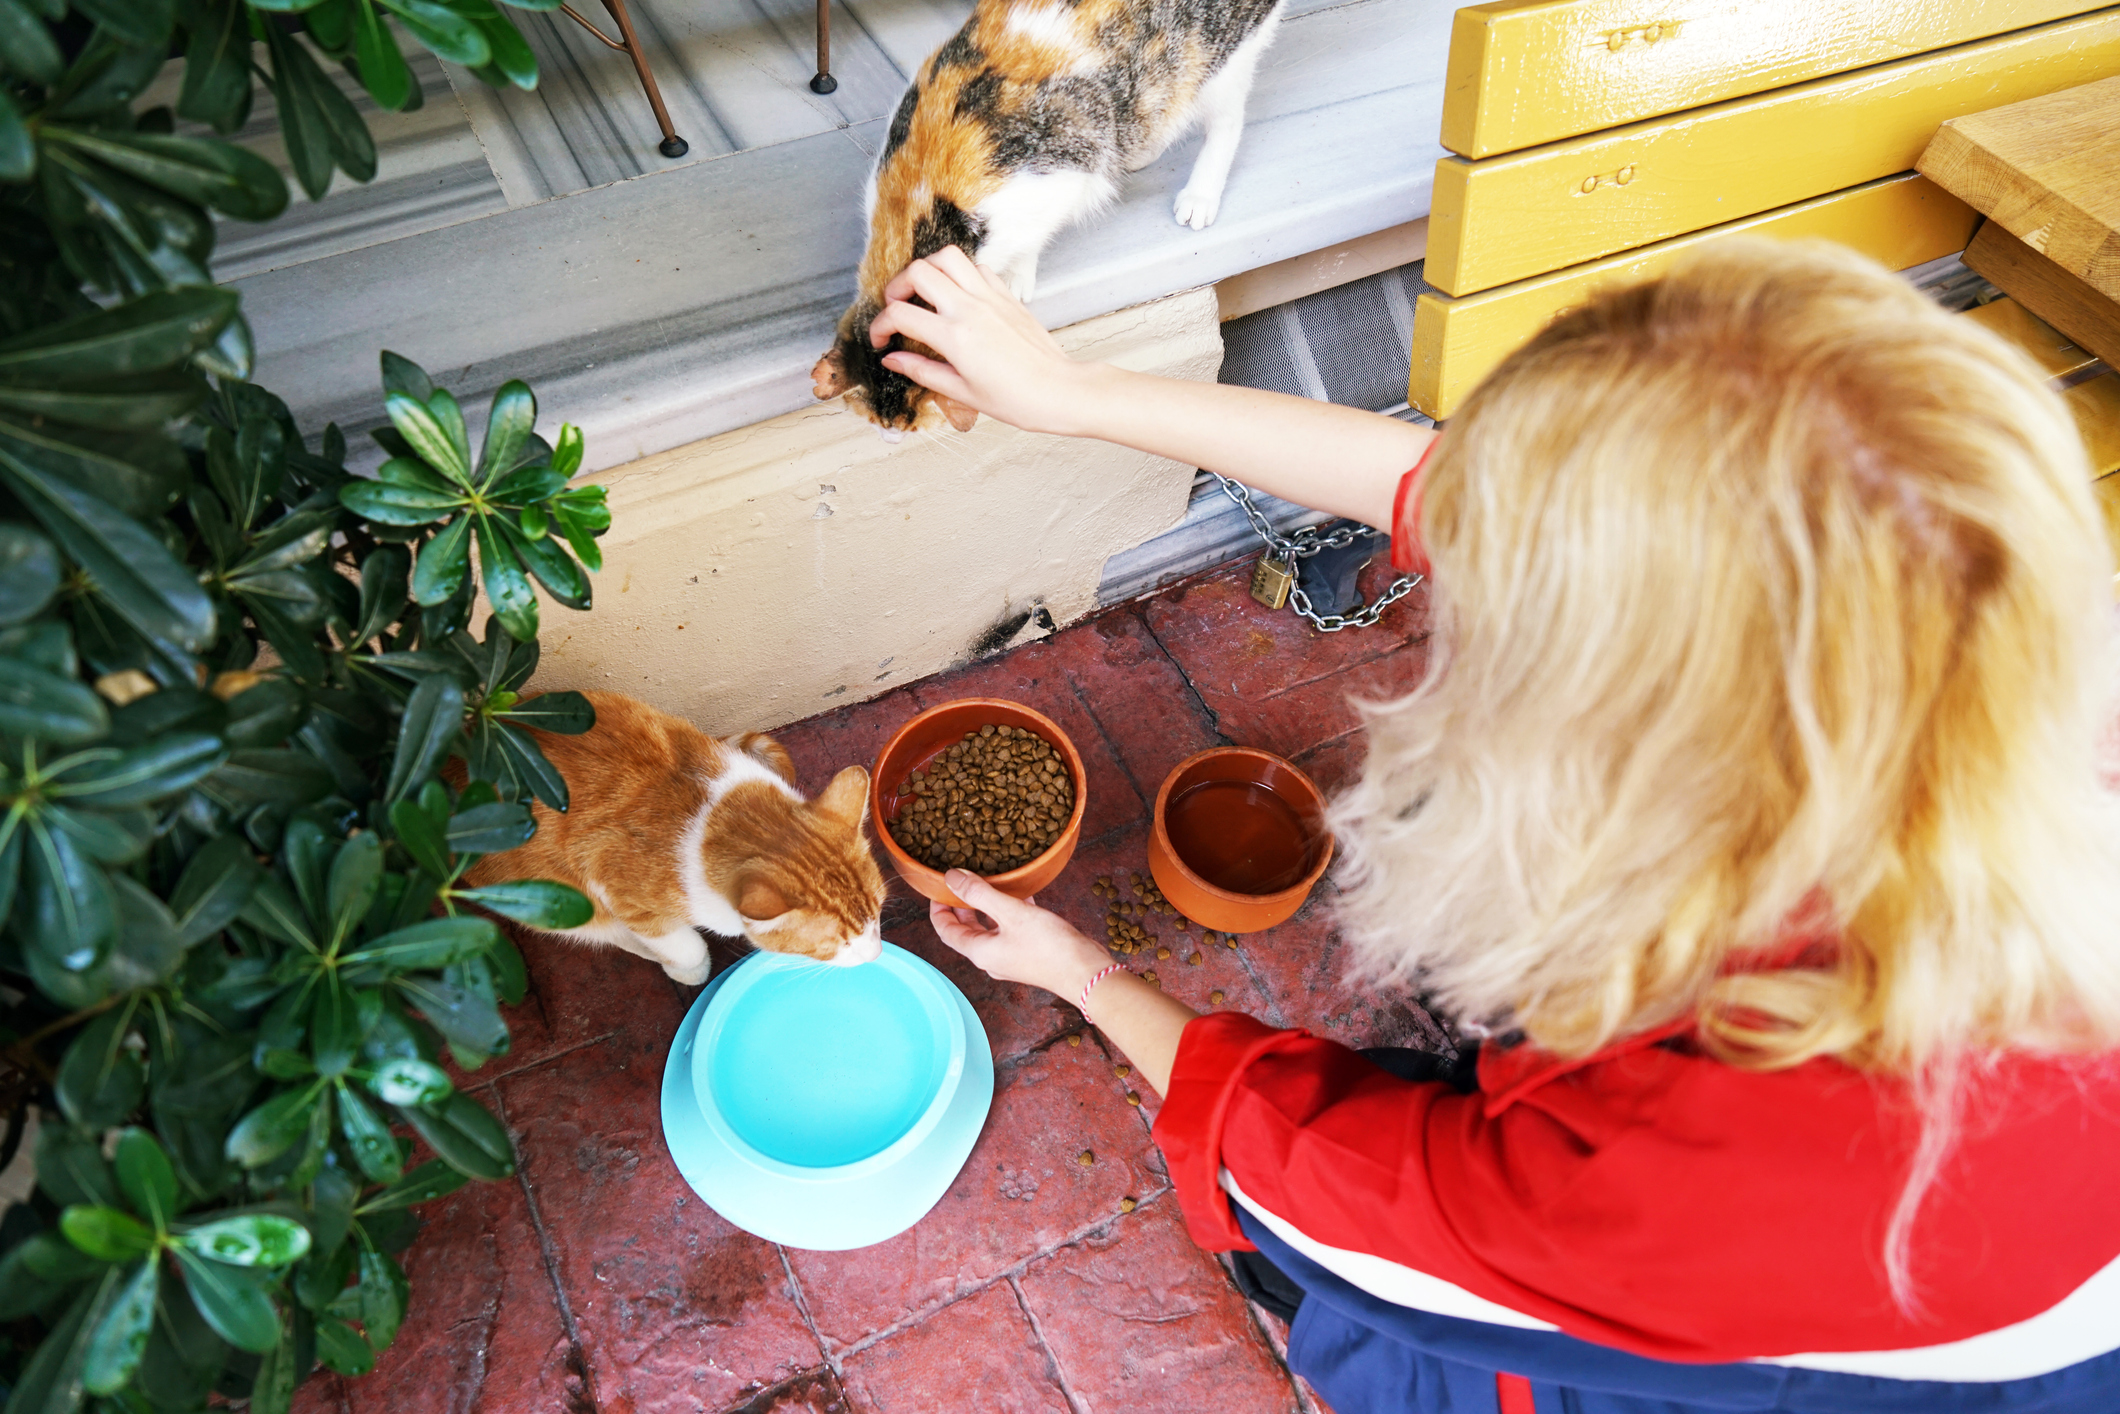 Blonde woman feeds two stray cats